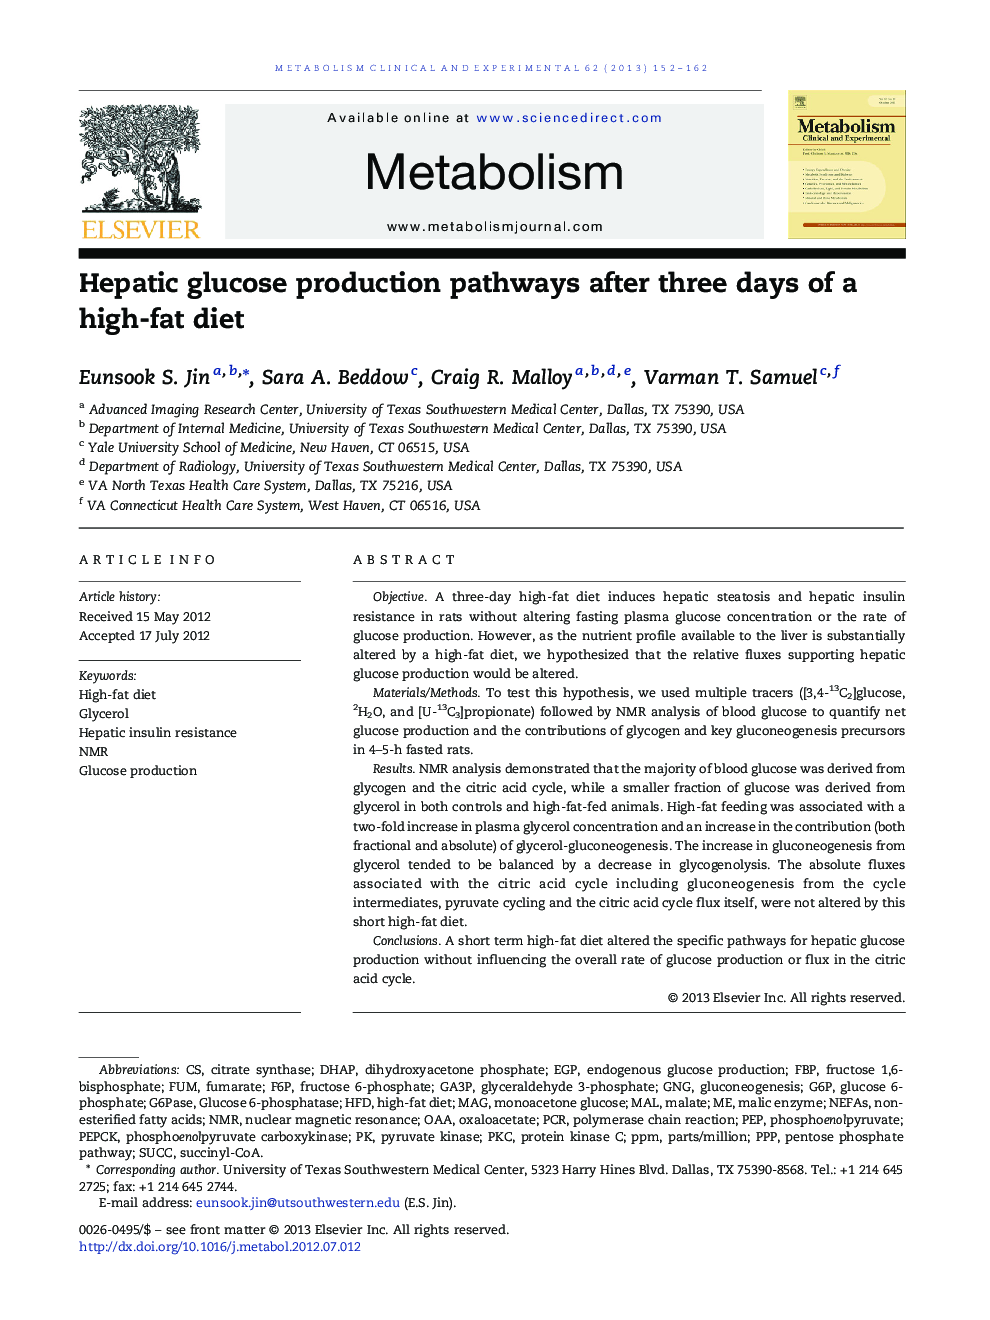 Hepatic glucose production pathways after three days of a high-fat diet